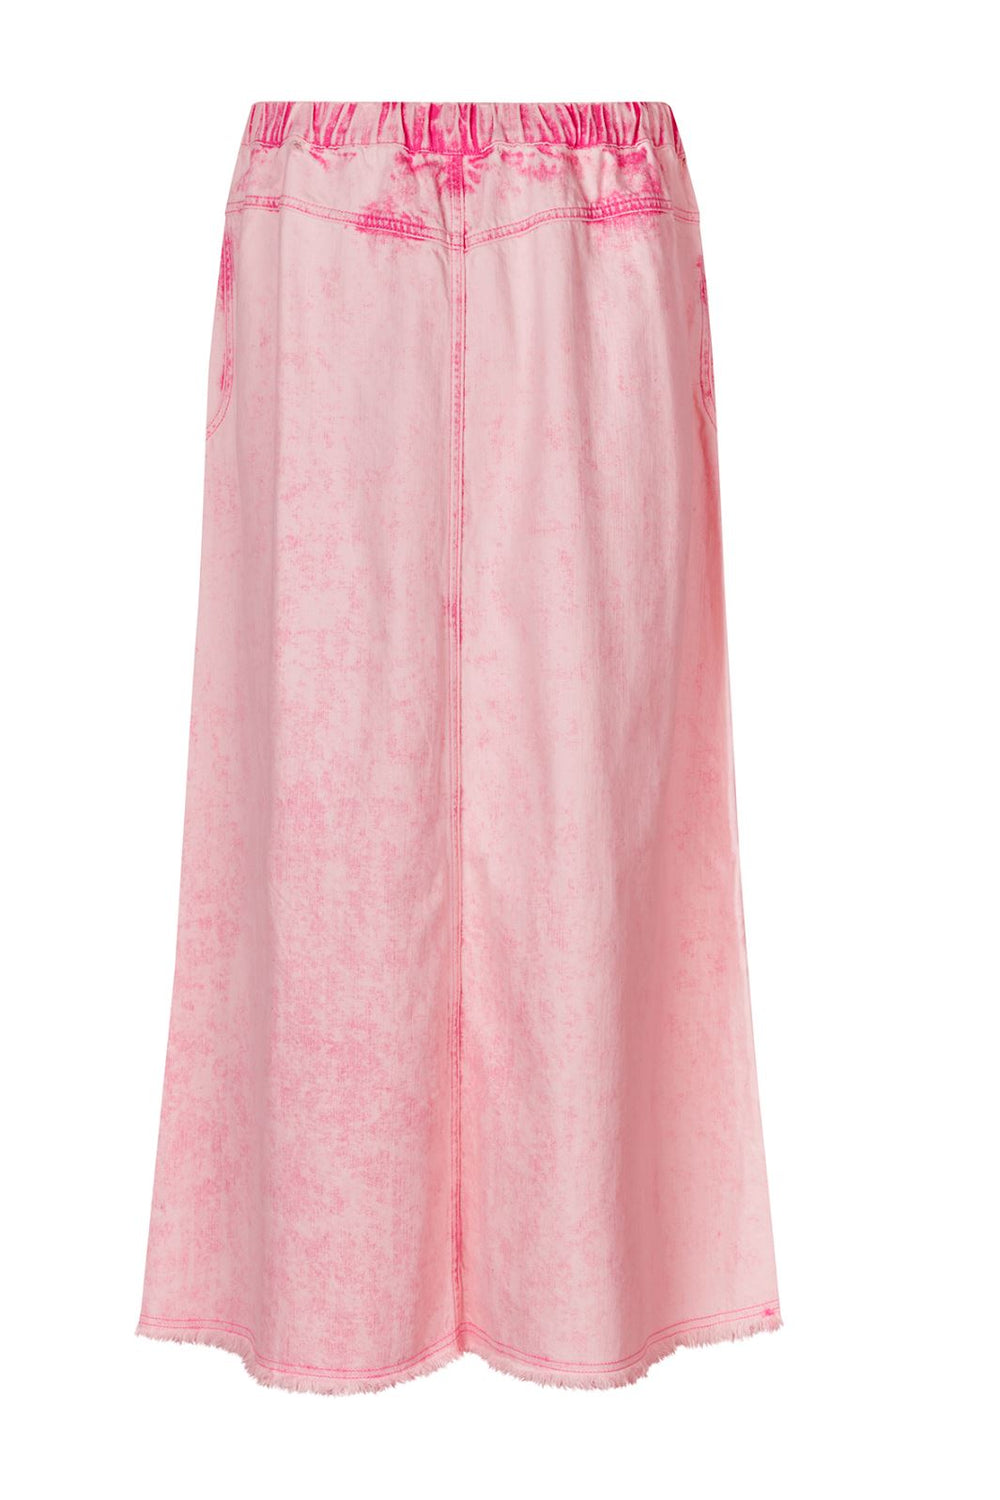 Lollys Laundry - NormandieLL Maxi Skirt 24235-2011 - 51 Nederdele 